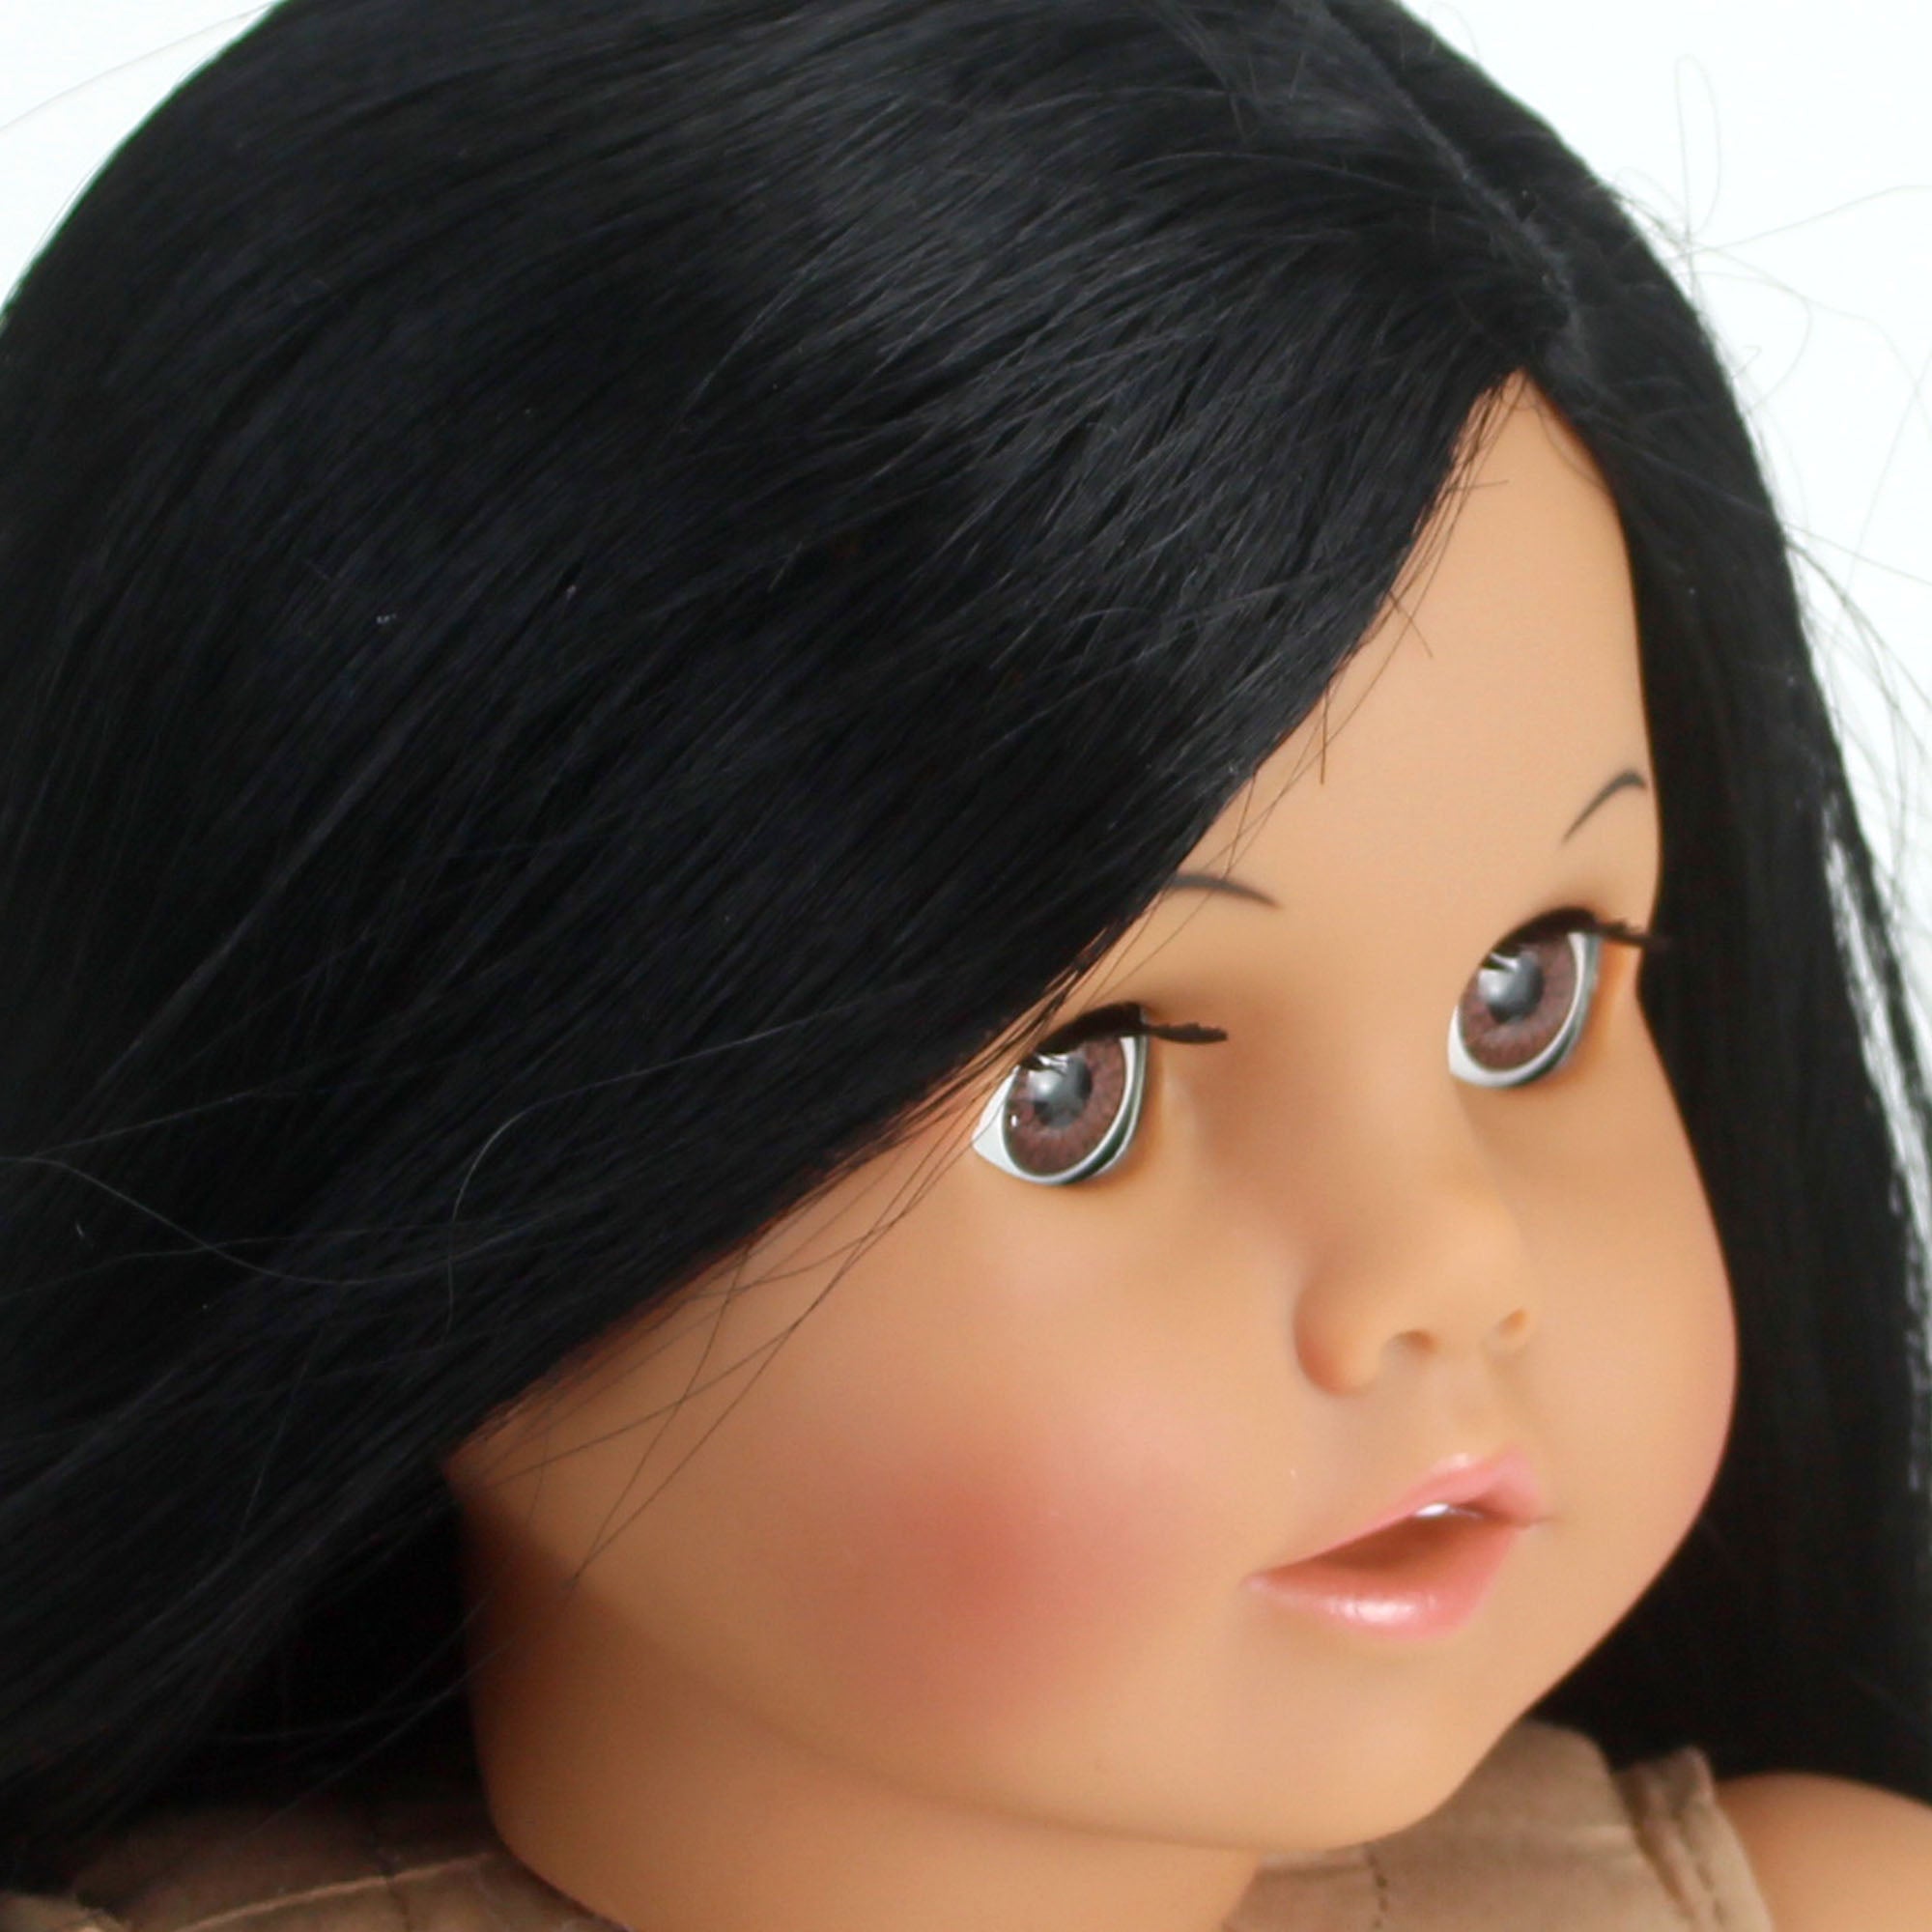 Sophia's Posable 18'' Soft Bodied Vinyl Doll "Julia" with Brown Hair and Brown Eyes in a Display Box, Medium Skin Tone